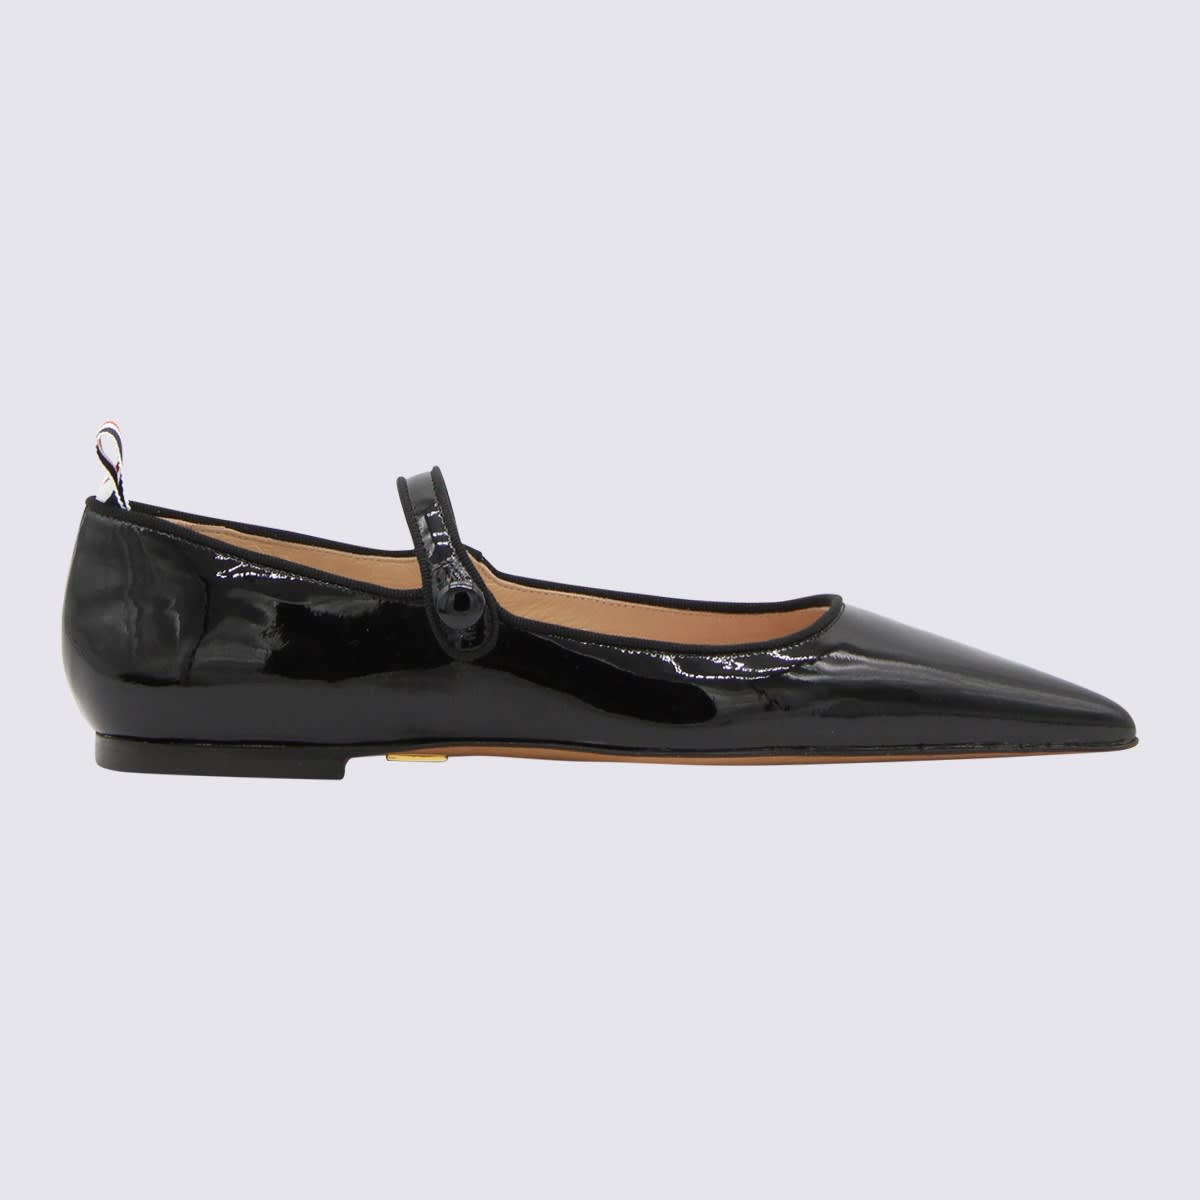 THOM BROWNE BLACK LEATHER BALLERINA SHOES